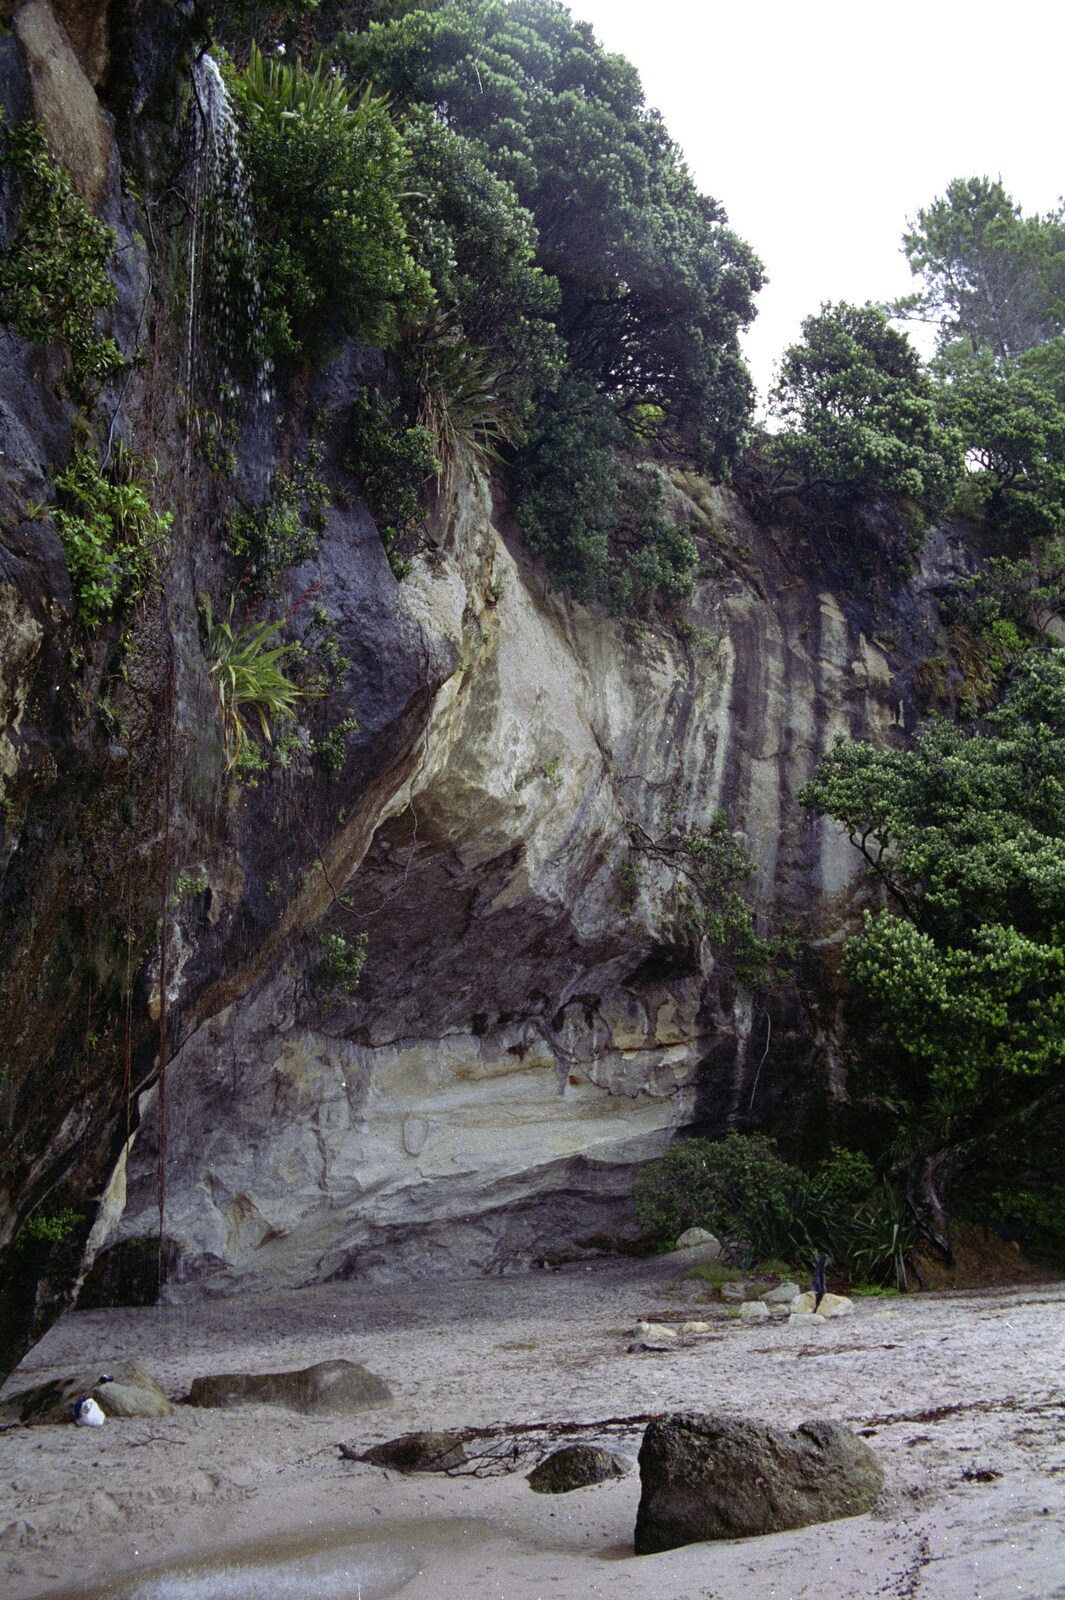 A mini waterfall tumbles over the cliff from Ferry Landing, Whitianga, New Zealand - 23rd November 1992